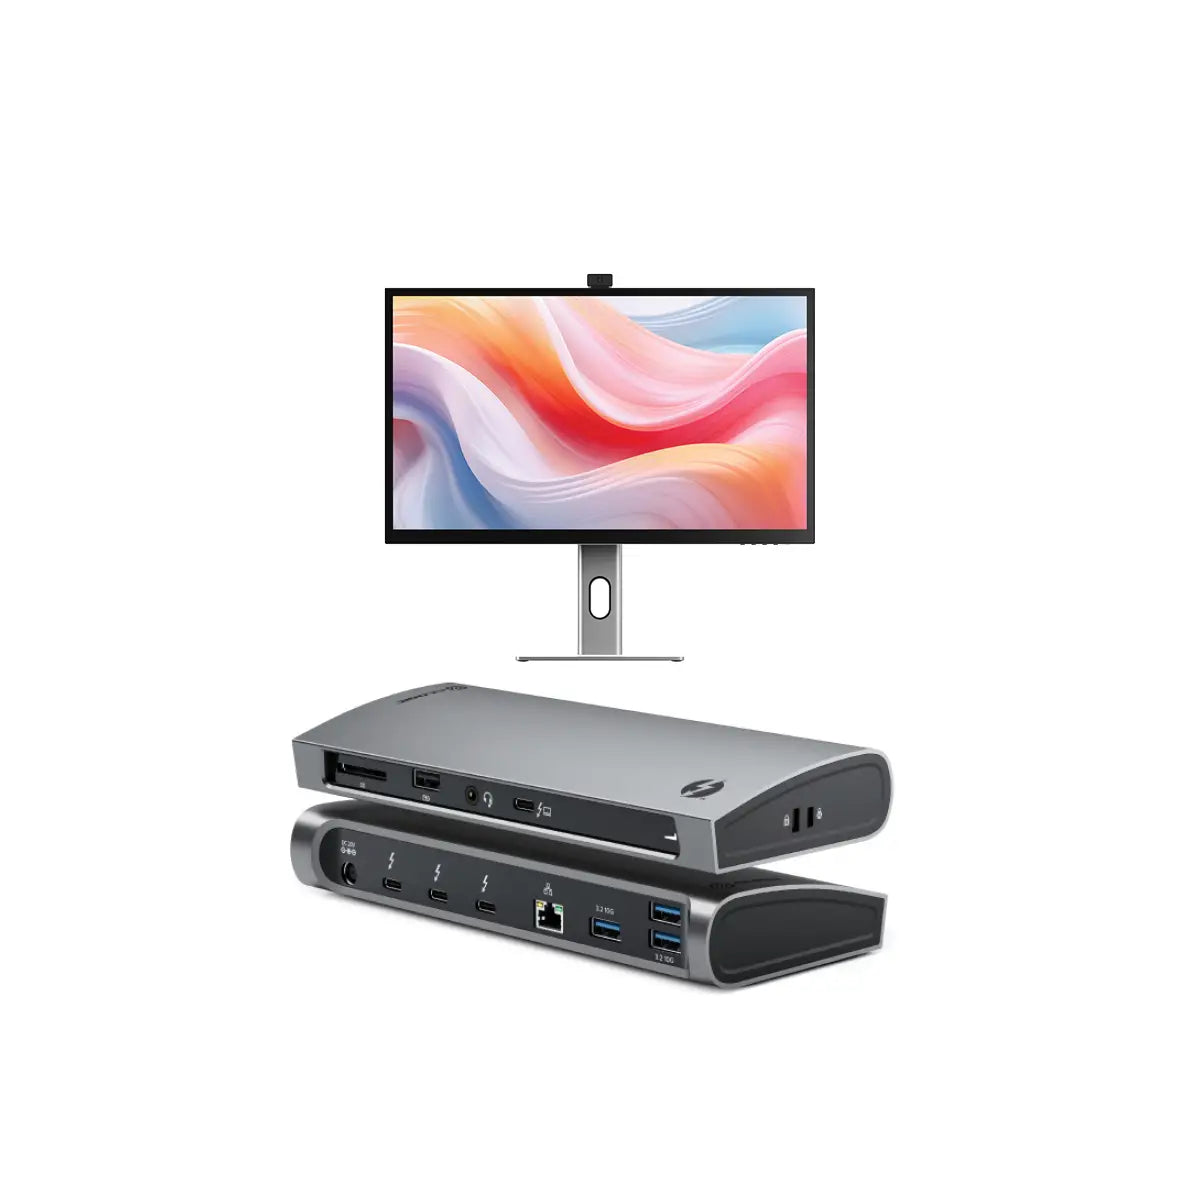 clarity-pro-27-uhd-4k-monitor-with-65w-pd-and-webcam-thunderbolt-4-blaze-docking-station_1